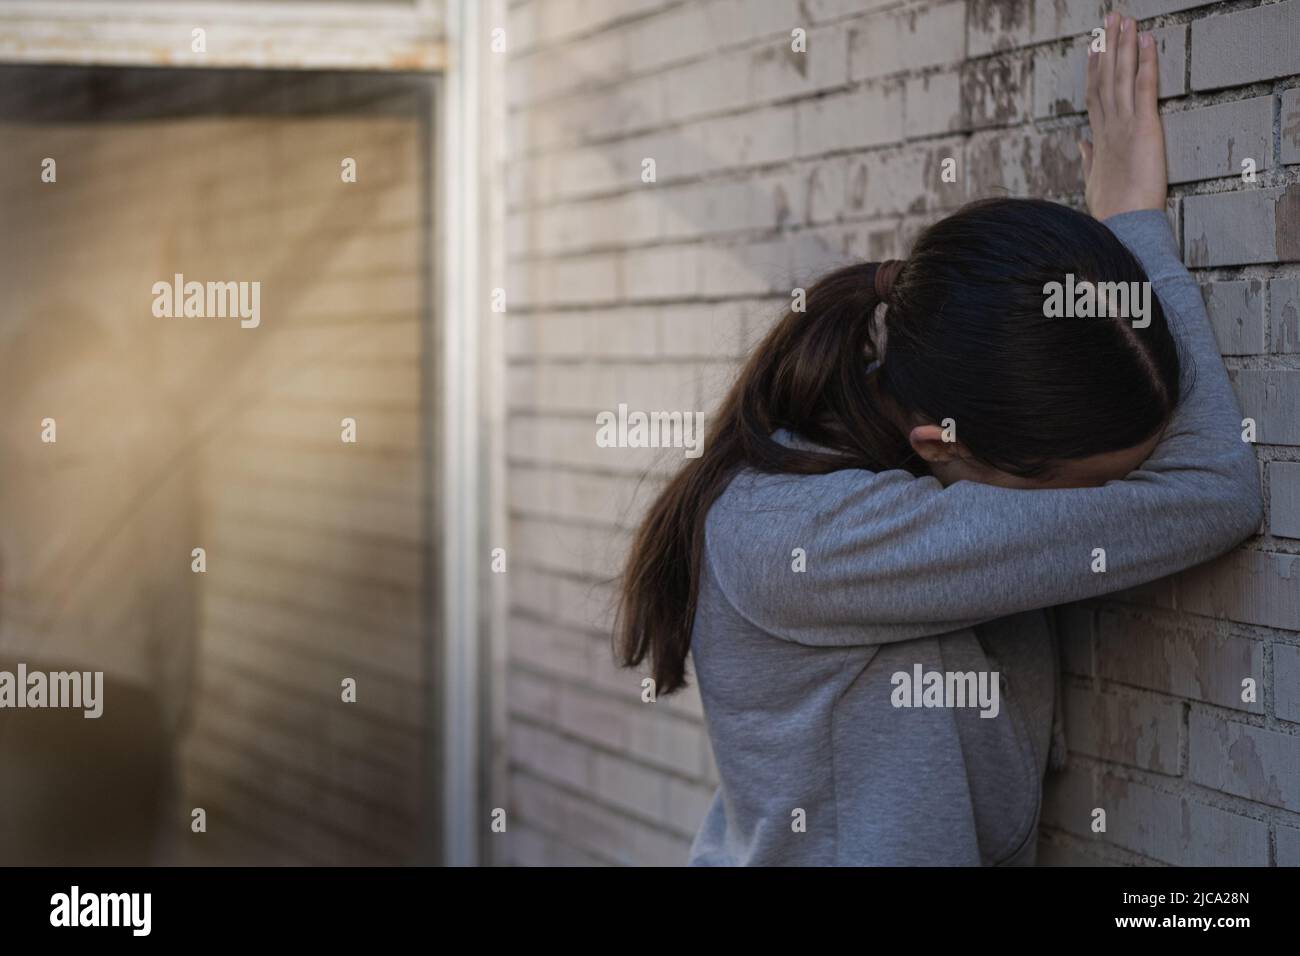 Young woman standing hides her face against a brick wall. Adolescent problems. Stock Photo